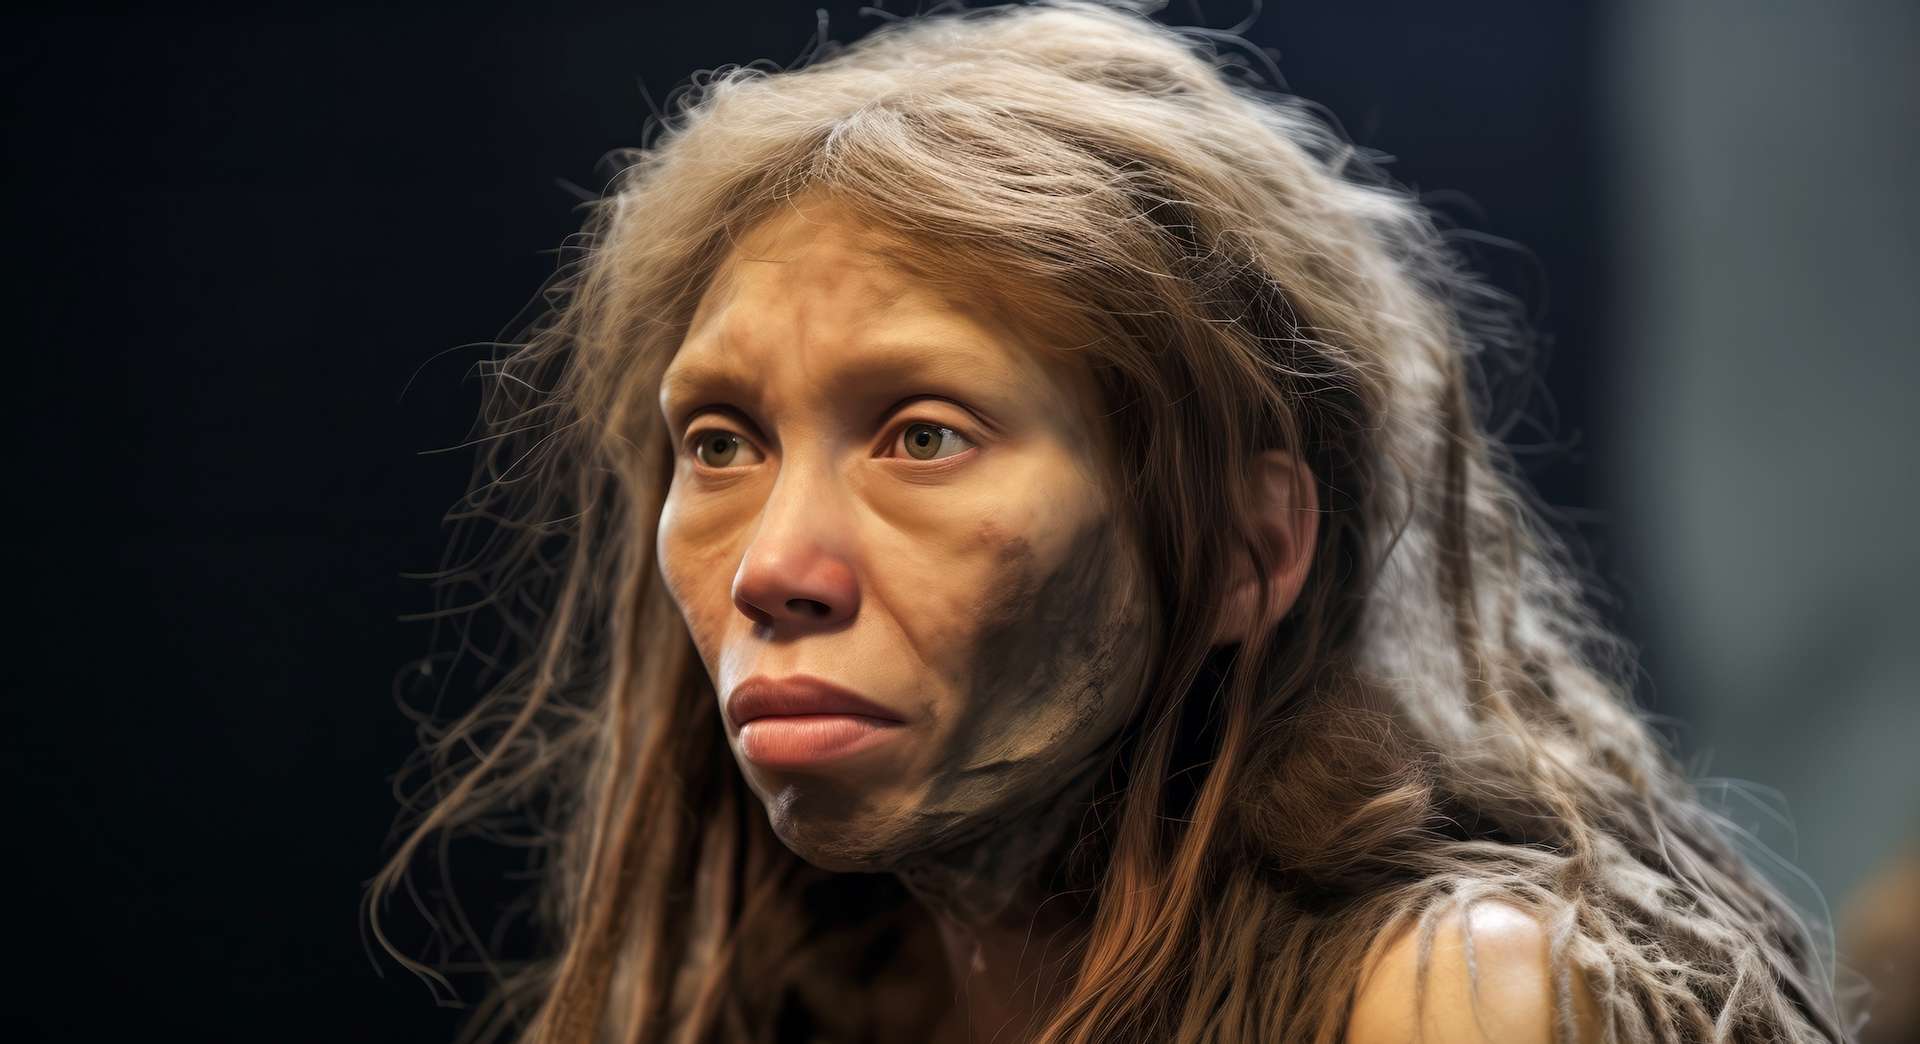 Neanderthals carried the same viruses as us 50,000 years ago and this raises questions